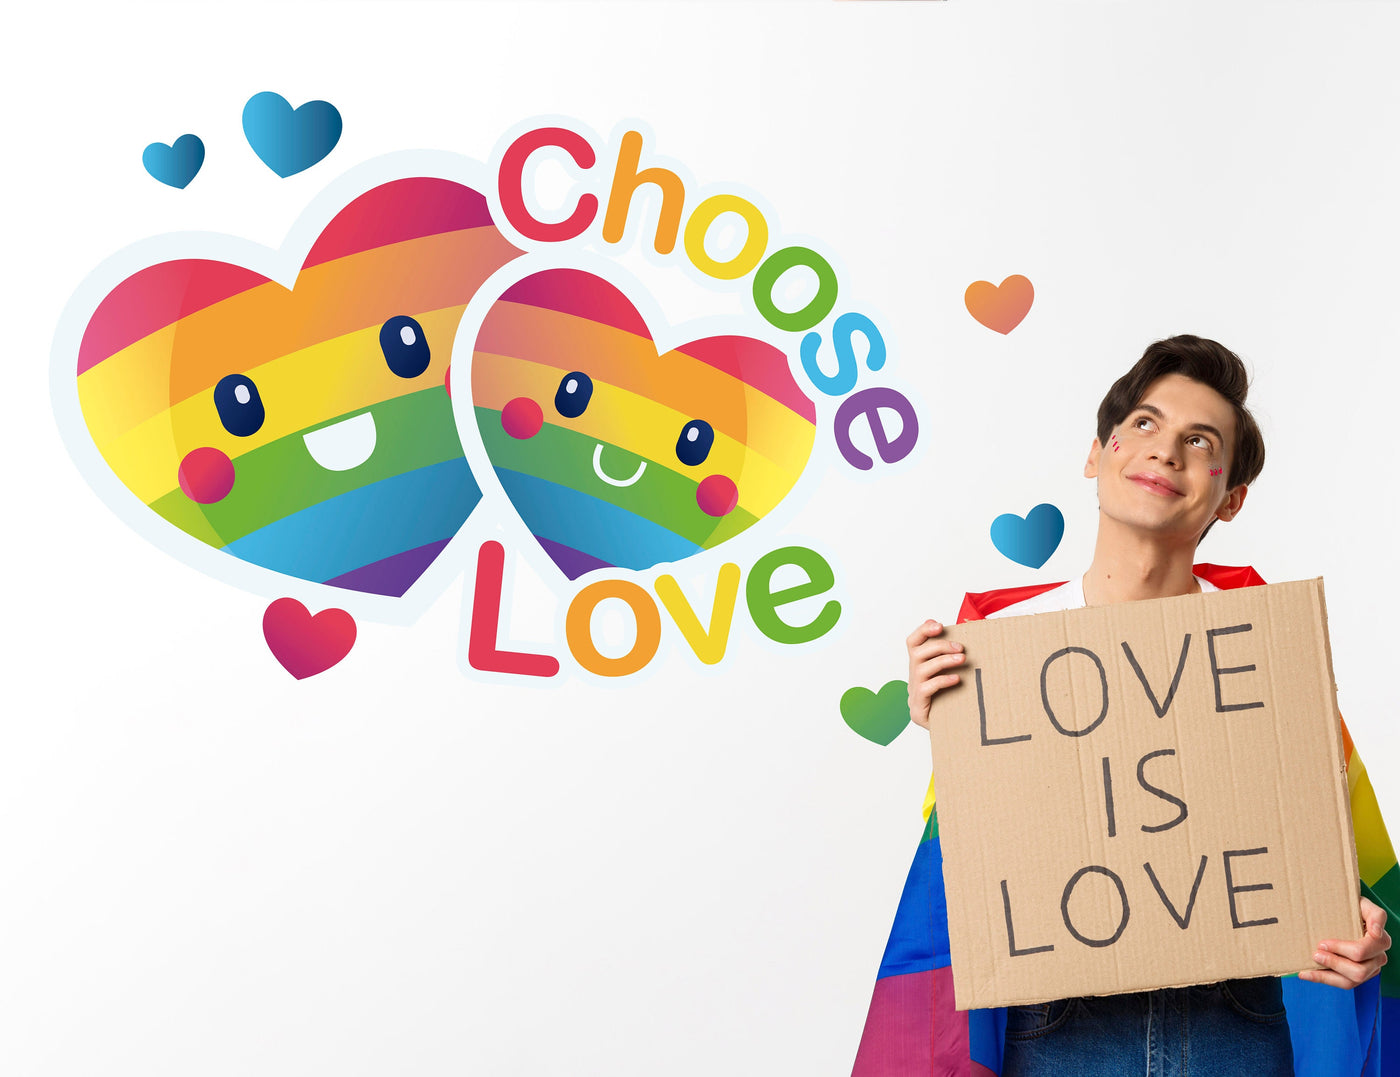 Choose Love Wall Decal for Room - Inclusive Office Decals - Celebrating Diversity Wall Decals - Pride Month Tribute Dorm Decals